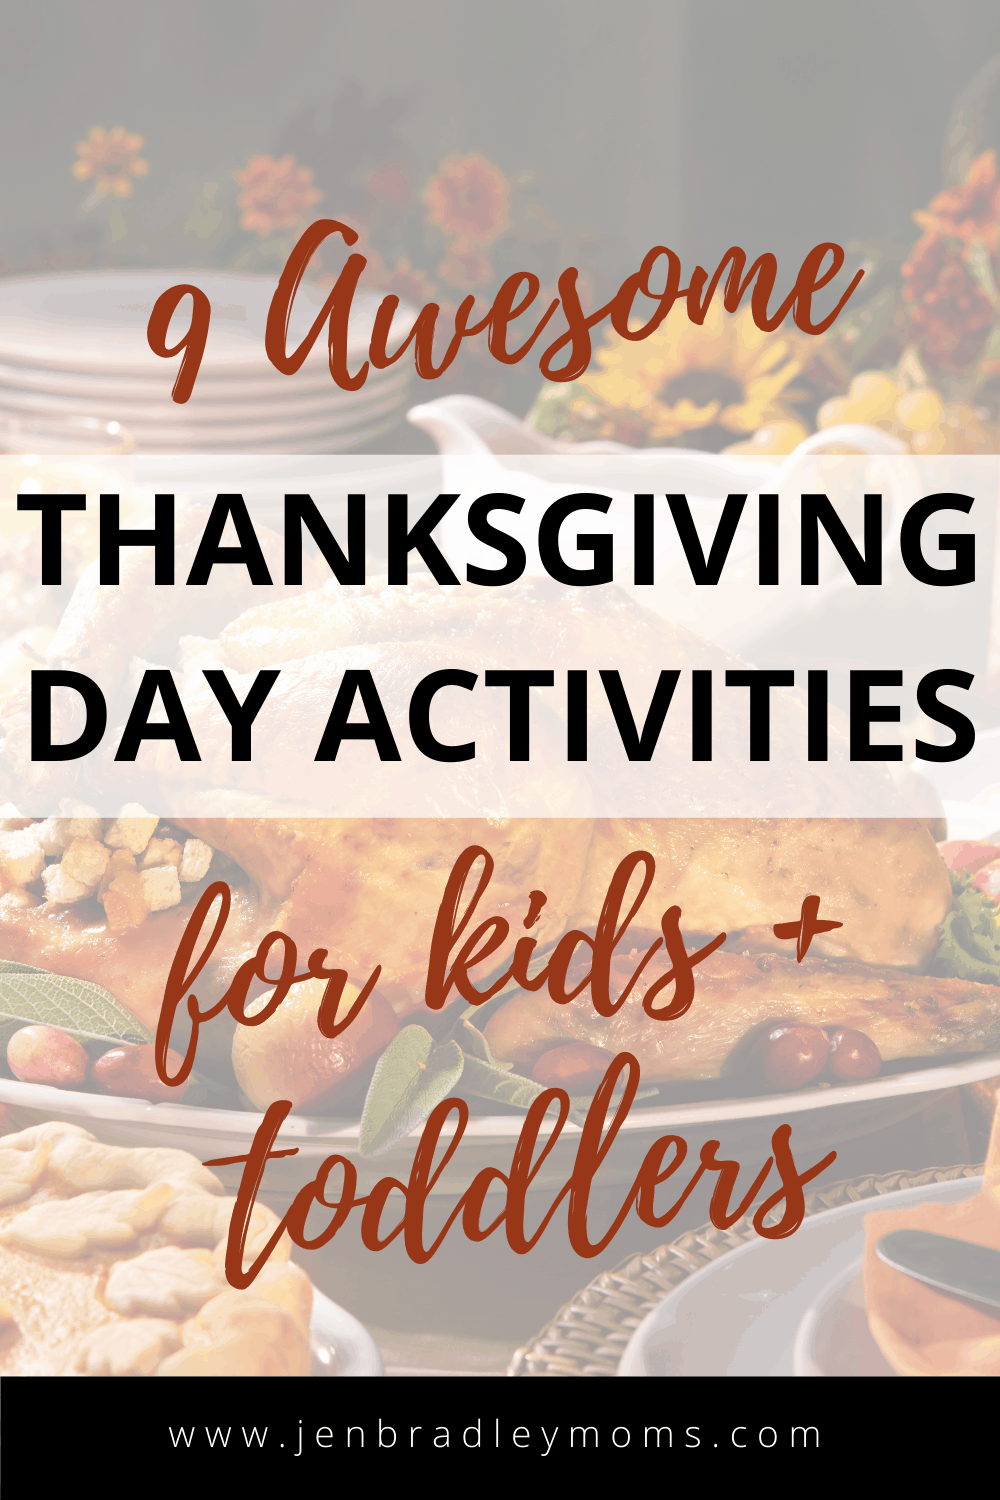 9 Awesome Thanksgiving Day Activities for Kids and Toddlers